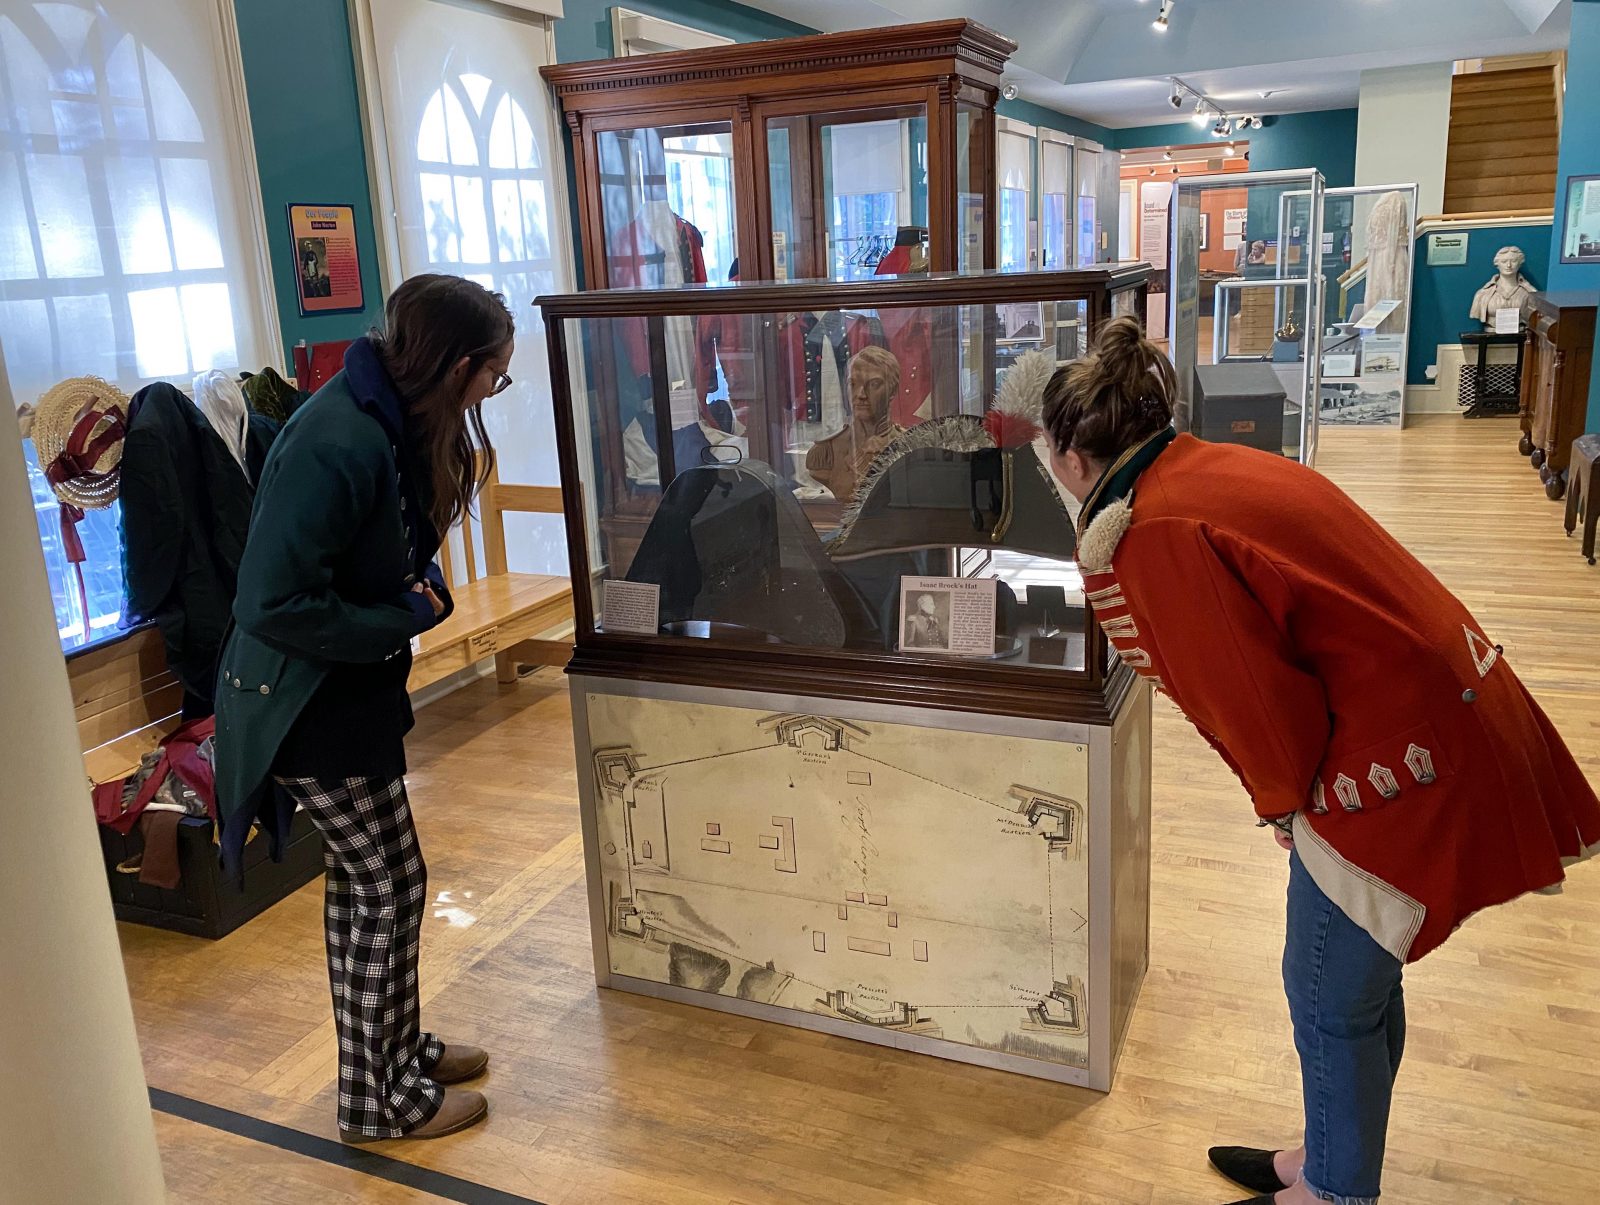 Two women with their backs to the camera are bending over to read signs in a glass display case featuring artifacts from the War of 1812, with other display cases in the background.